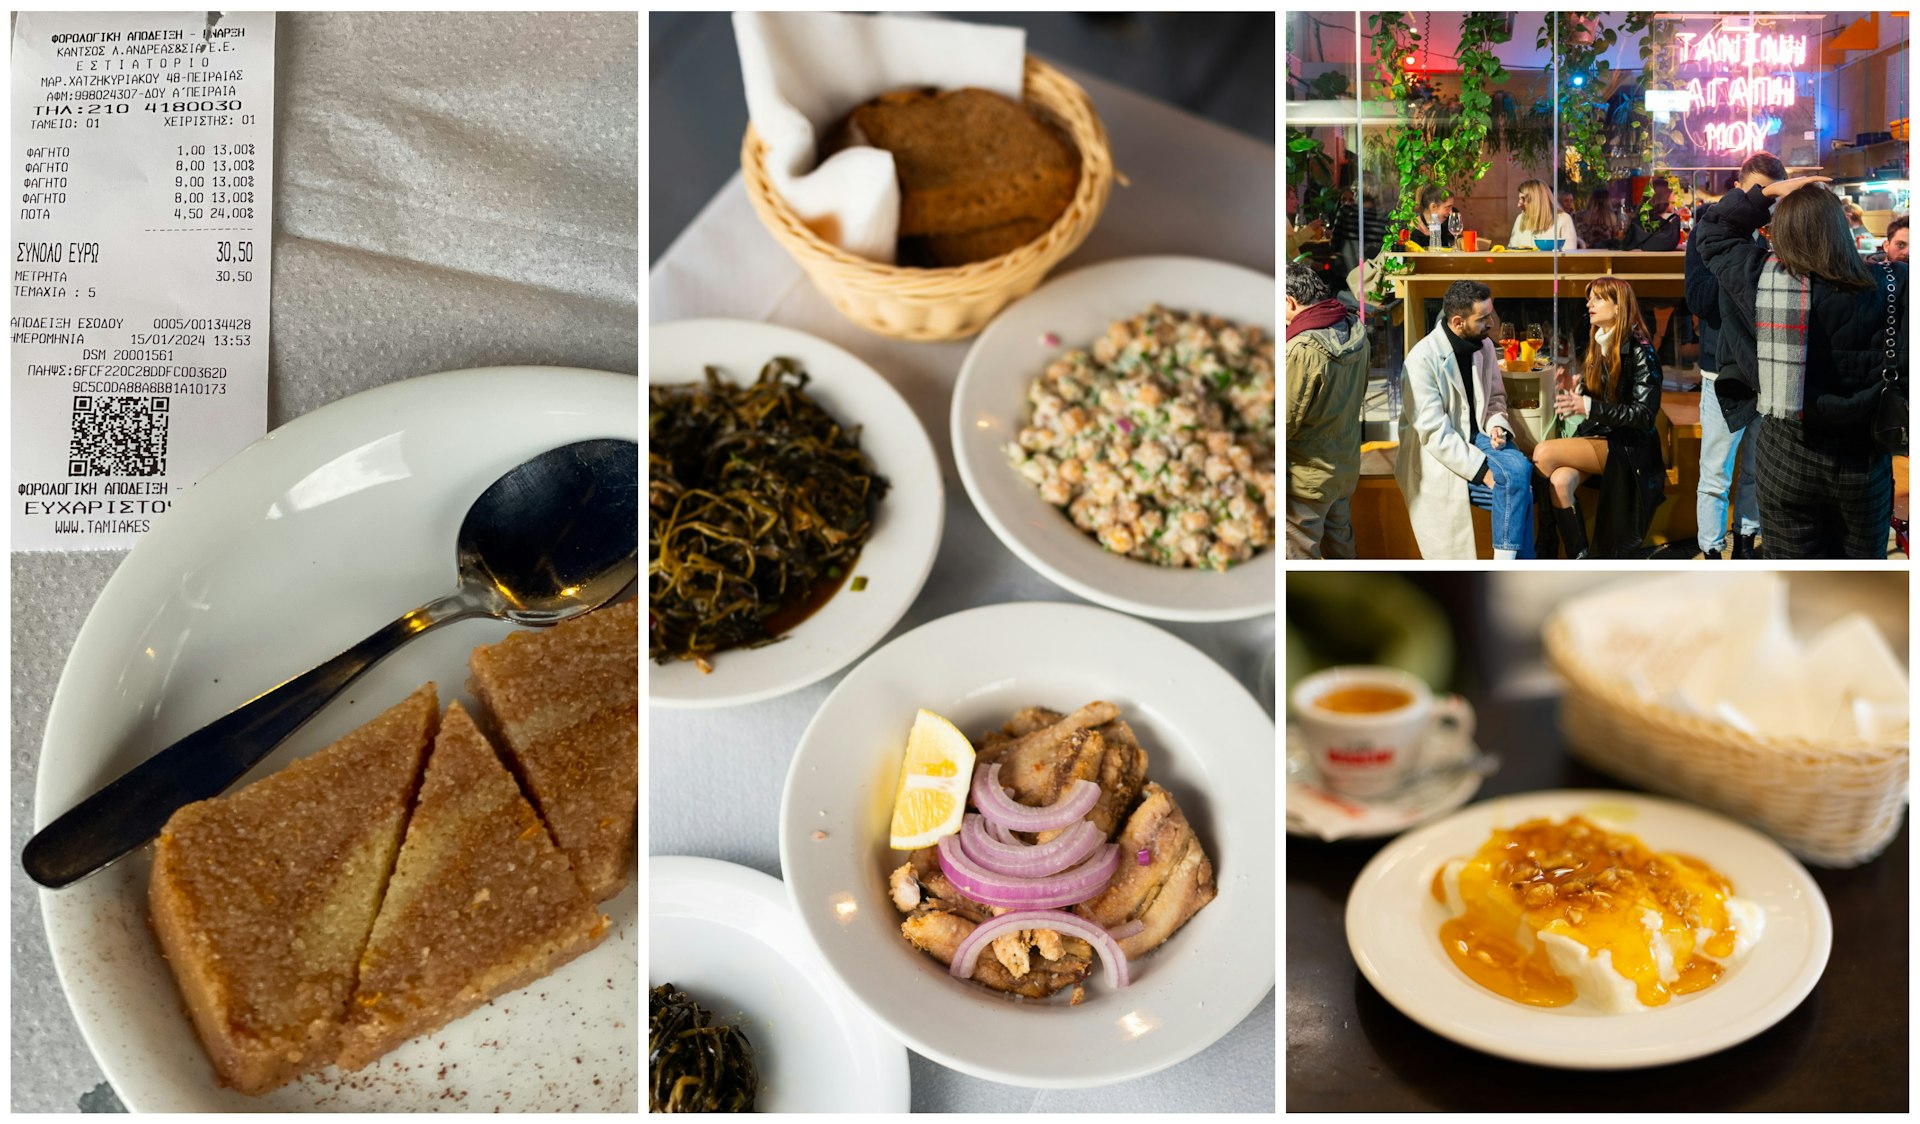 A collage of image from Austin's Monday including a lively bar scene and images of traditional Greek dinners and dessert